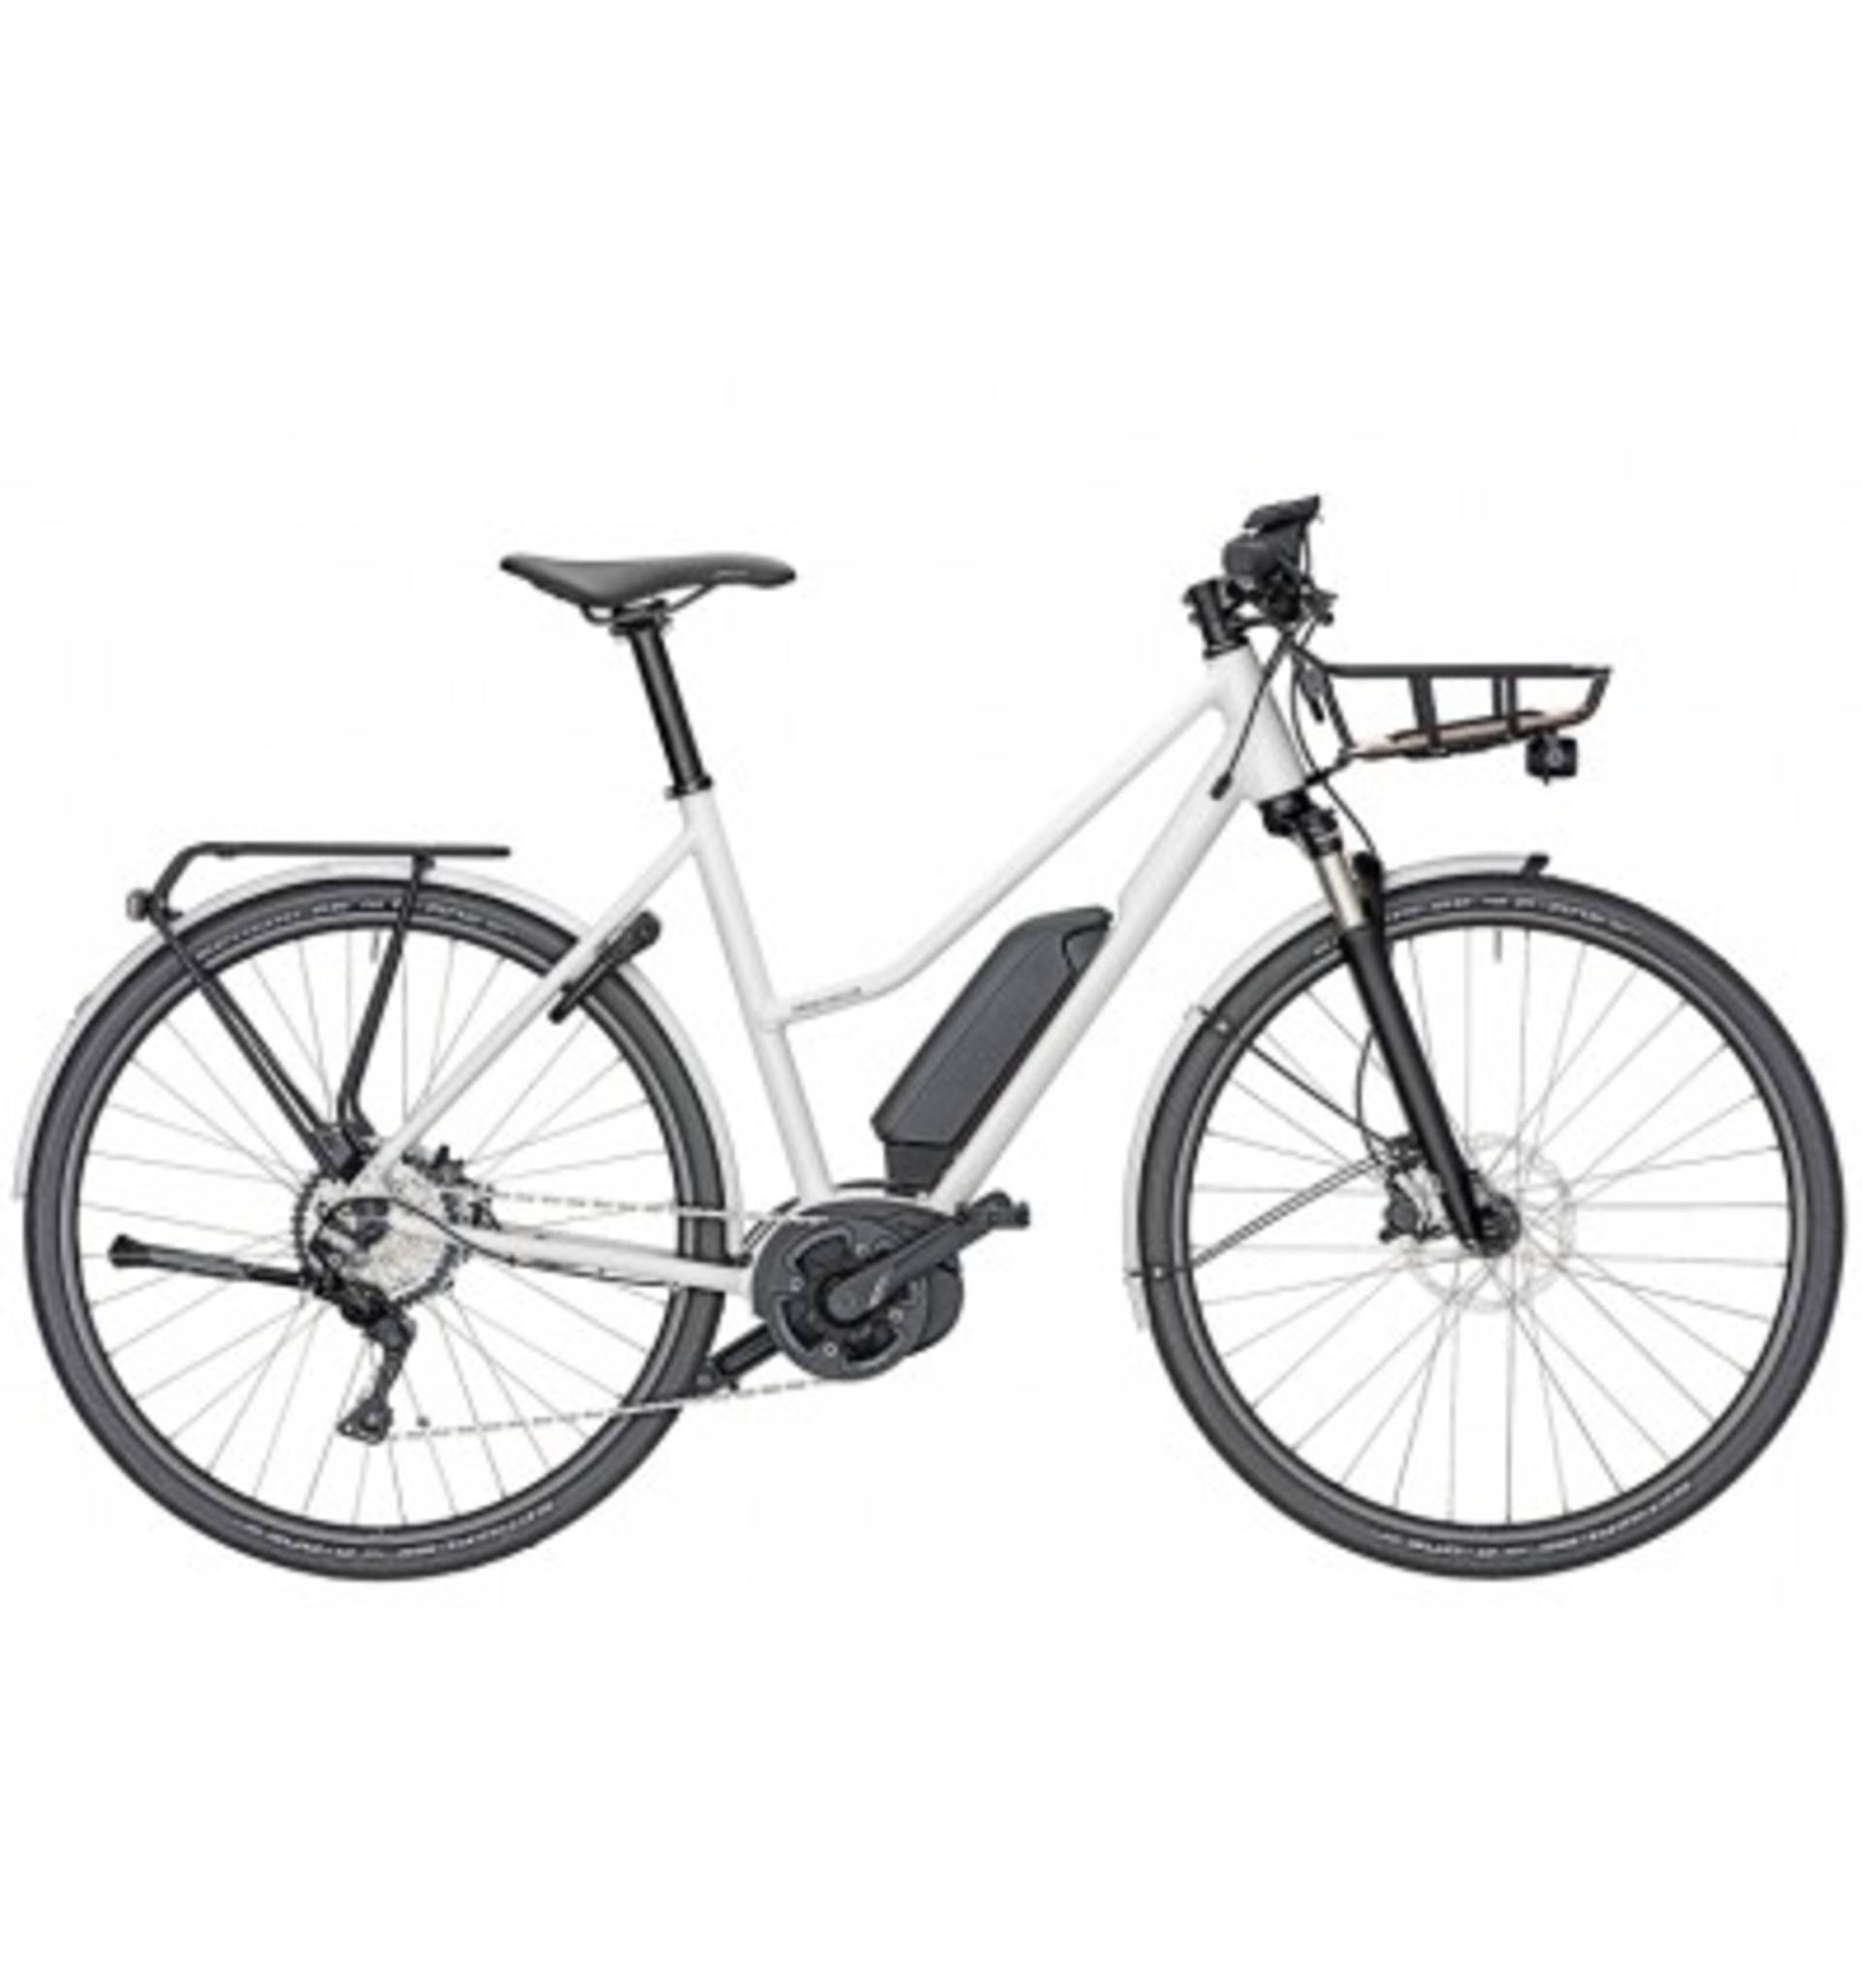 Riese & Müller Roadster Mixte Touring 500Wh Intuvia Voordrager Bagagedrager Mixed Wit 45cm 2019 - 1/1